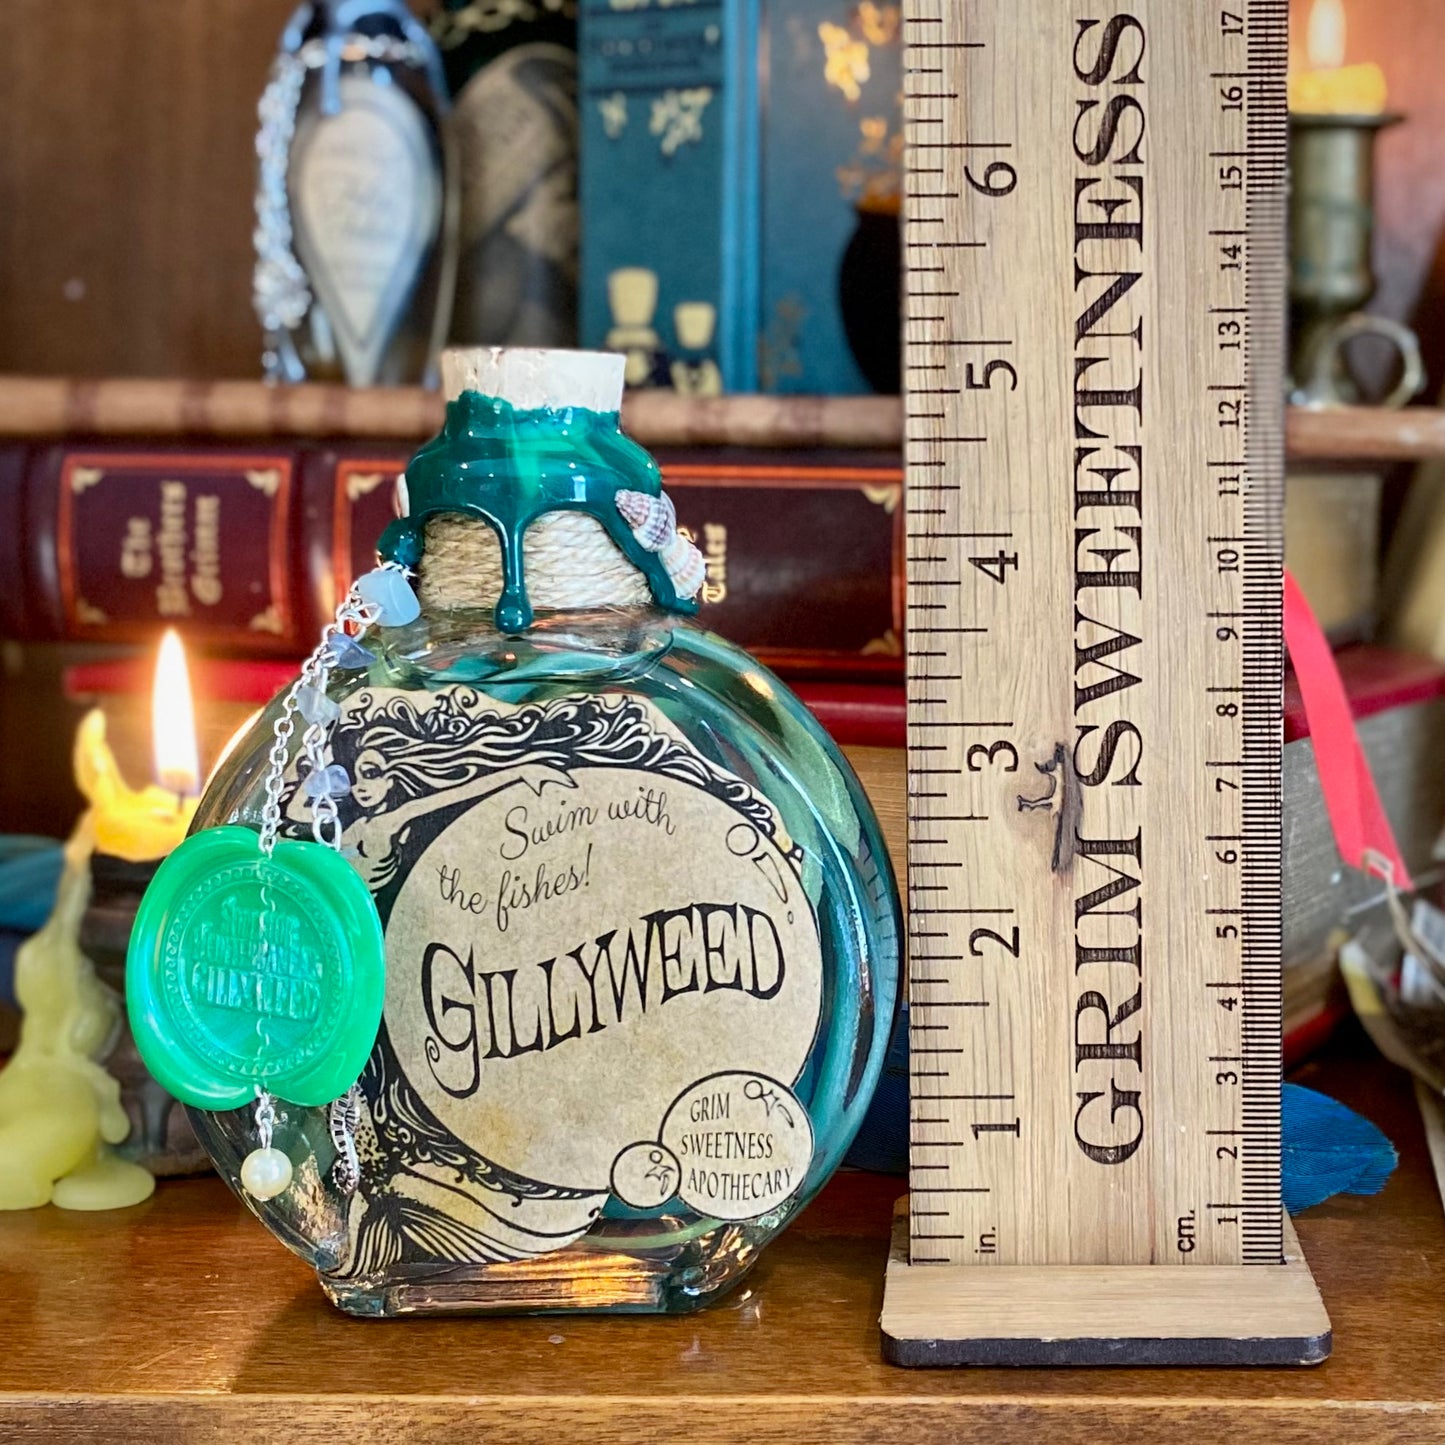 Gillyweed, A Magical Water Plant Potion Bottle Prop